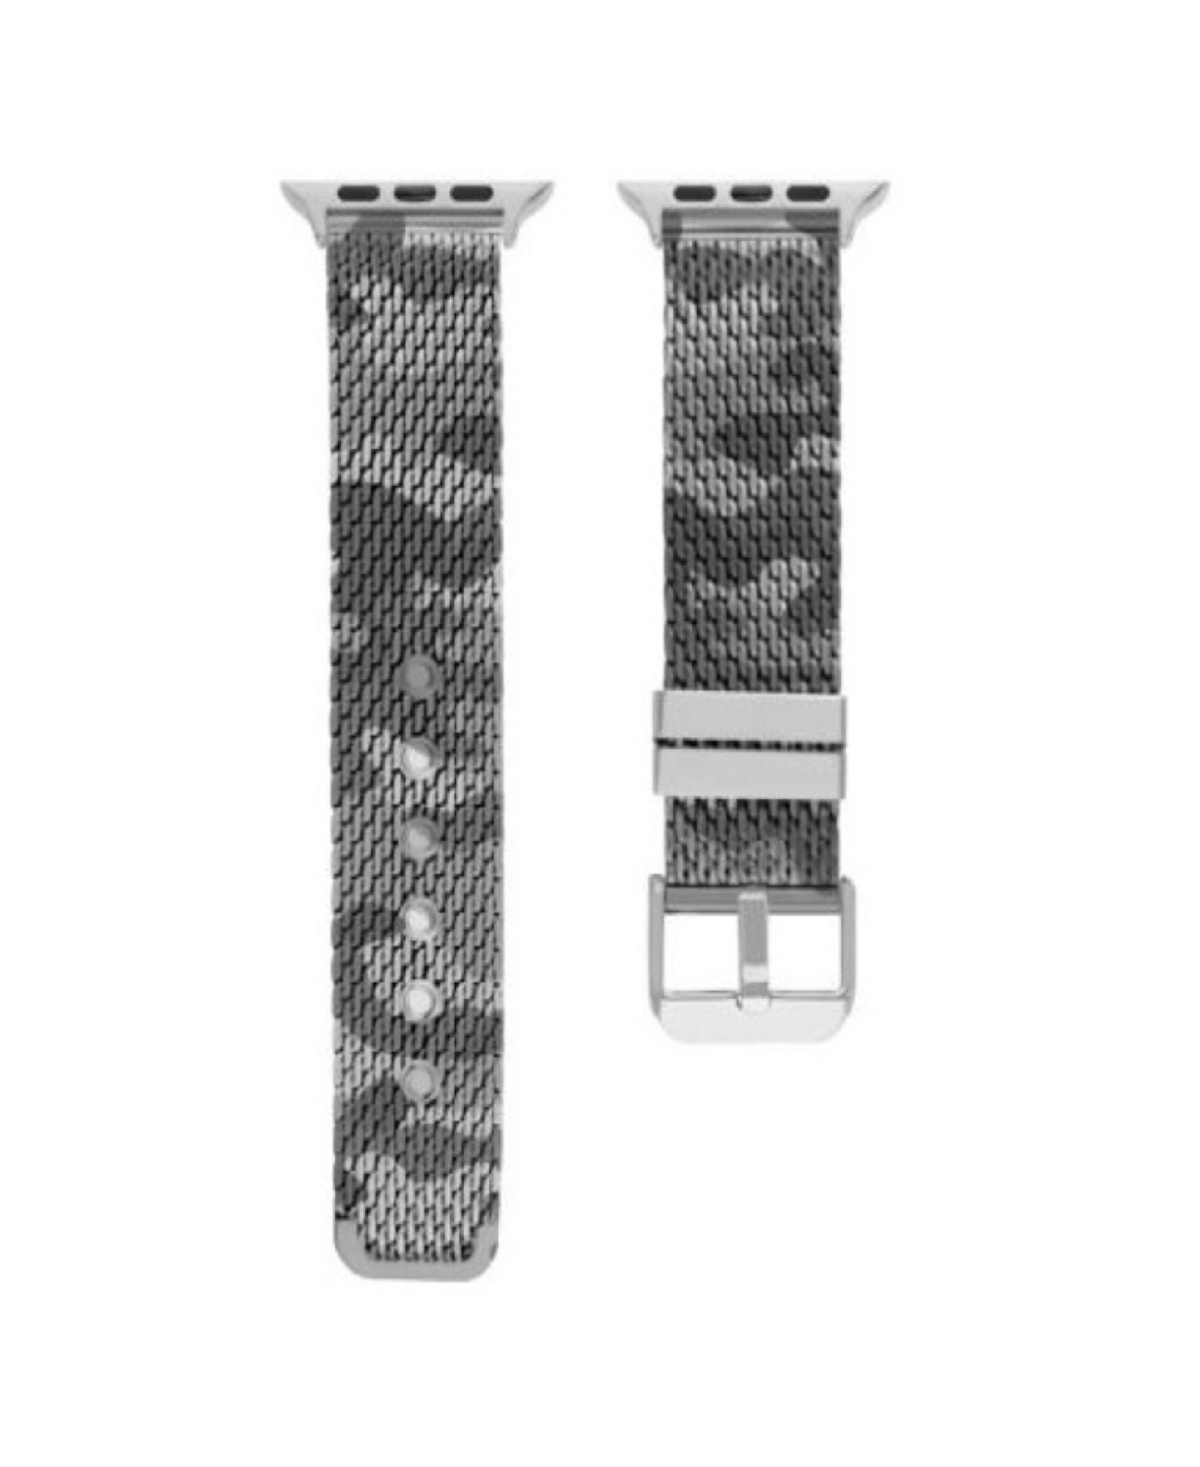 Men's Gray Camo Stainless Steel Mesh Strap Compatible for 42mm, 44mm Apple Watch - Gray